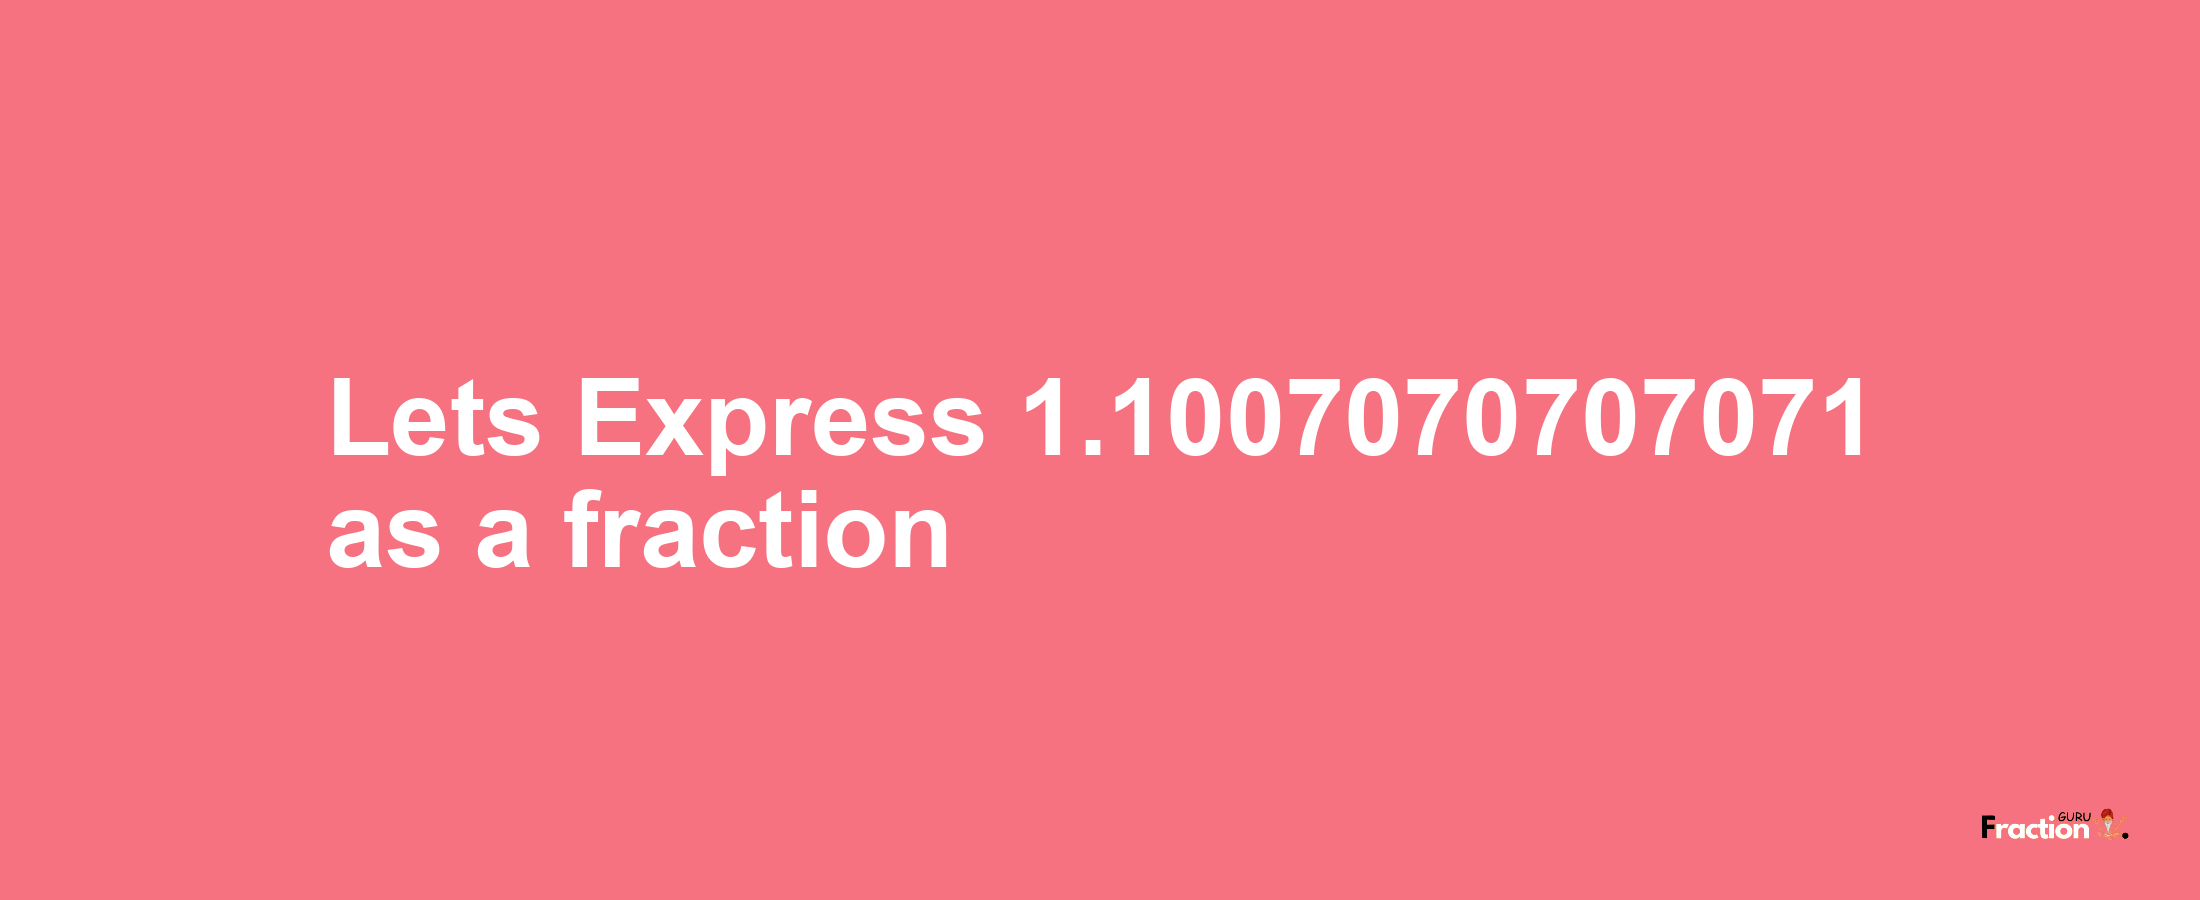 Lets Express 1.1007070707071 as afraction